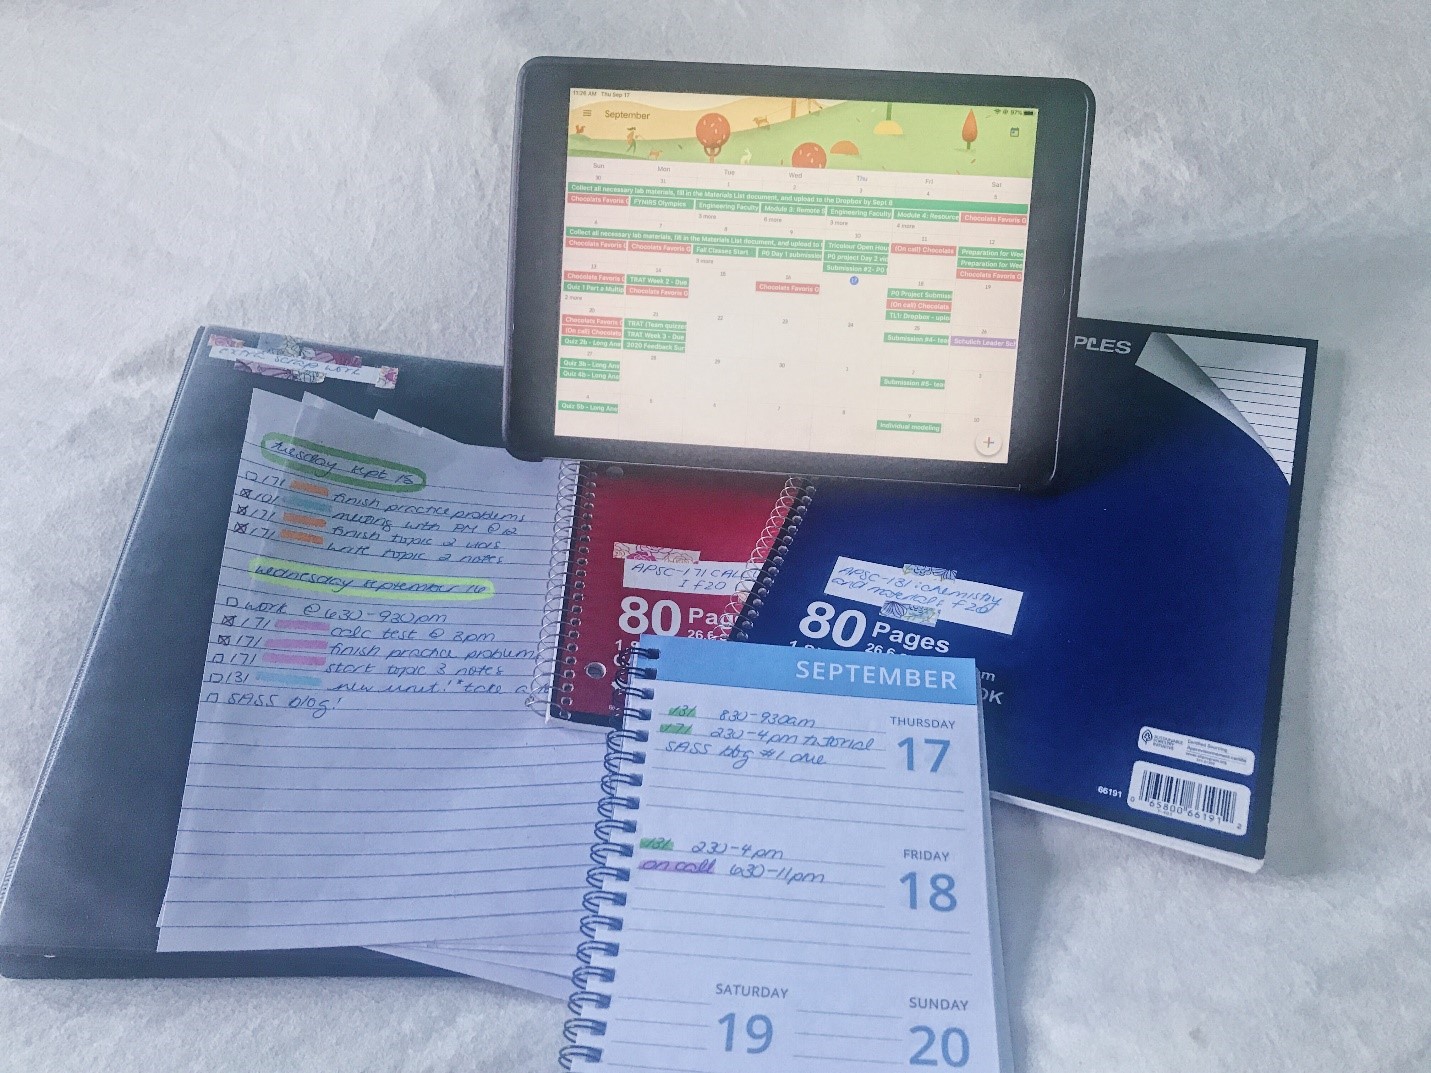 Liyi's organized schedule and notebooks